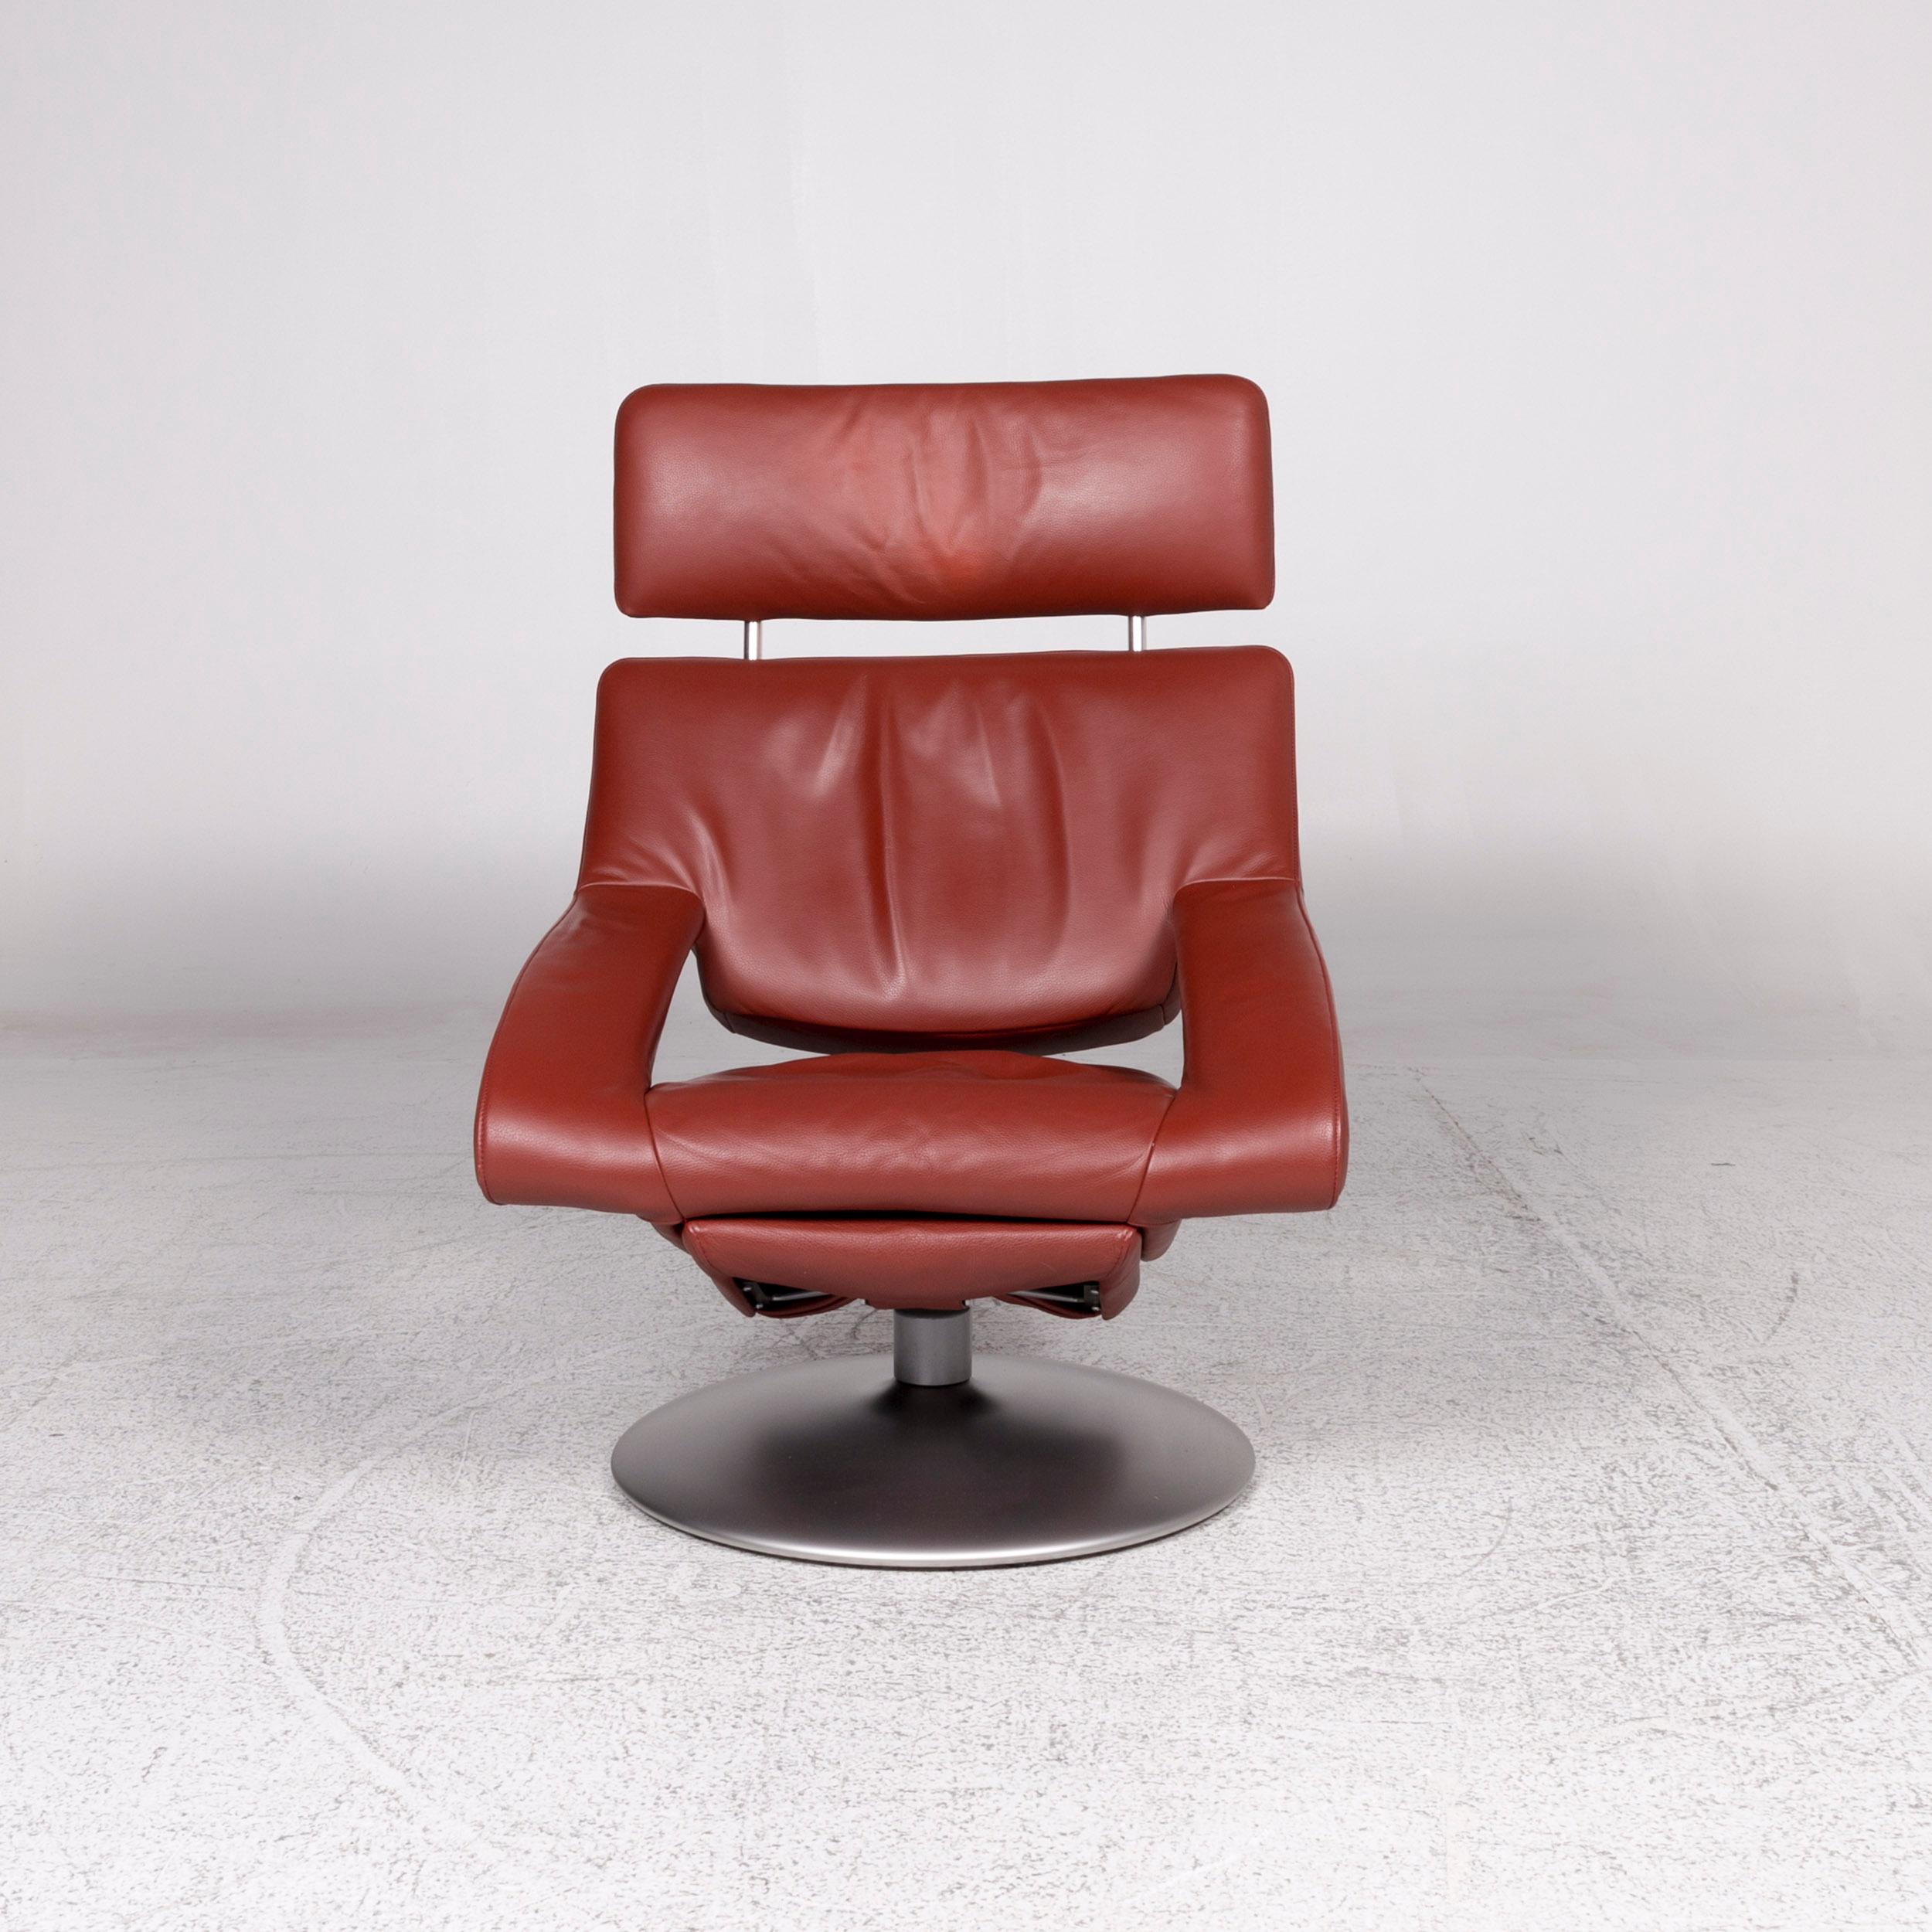 We bring to you a De Sede ds 255 leather armchair red incl. function.
 
Product measurements in centimetres:
 
Depth 90
Width 79
Height 112
Seat-height 45
Rest-height 55
Seat-depth 58
Seat-width 51
Back-height 71.

 